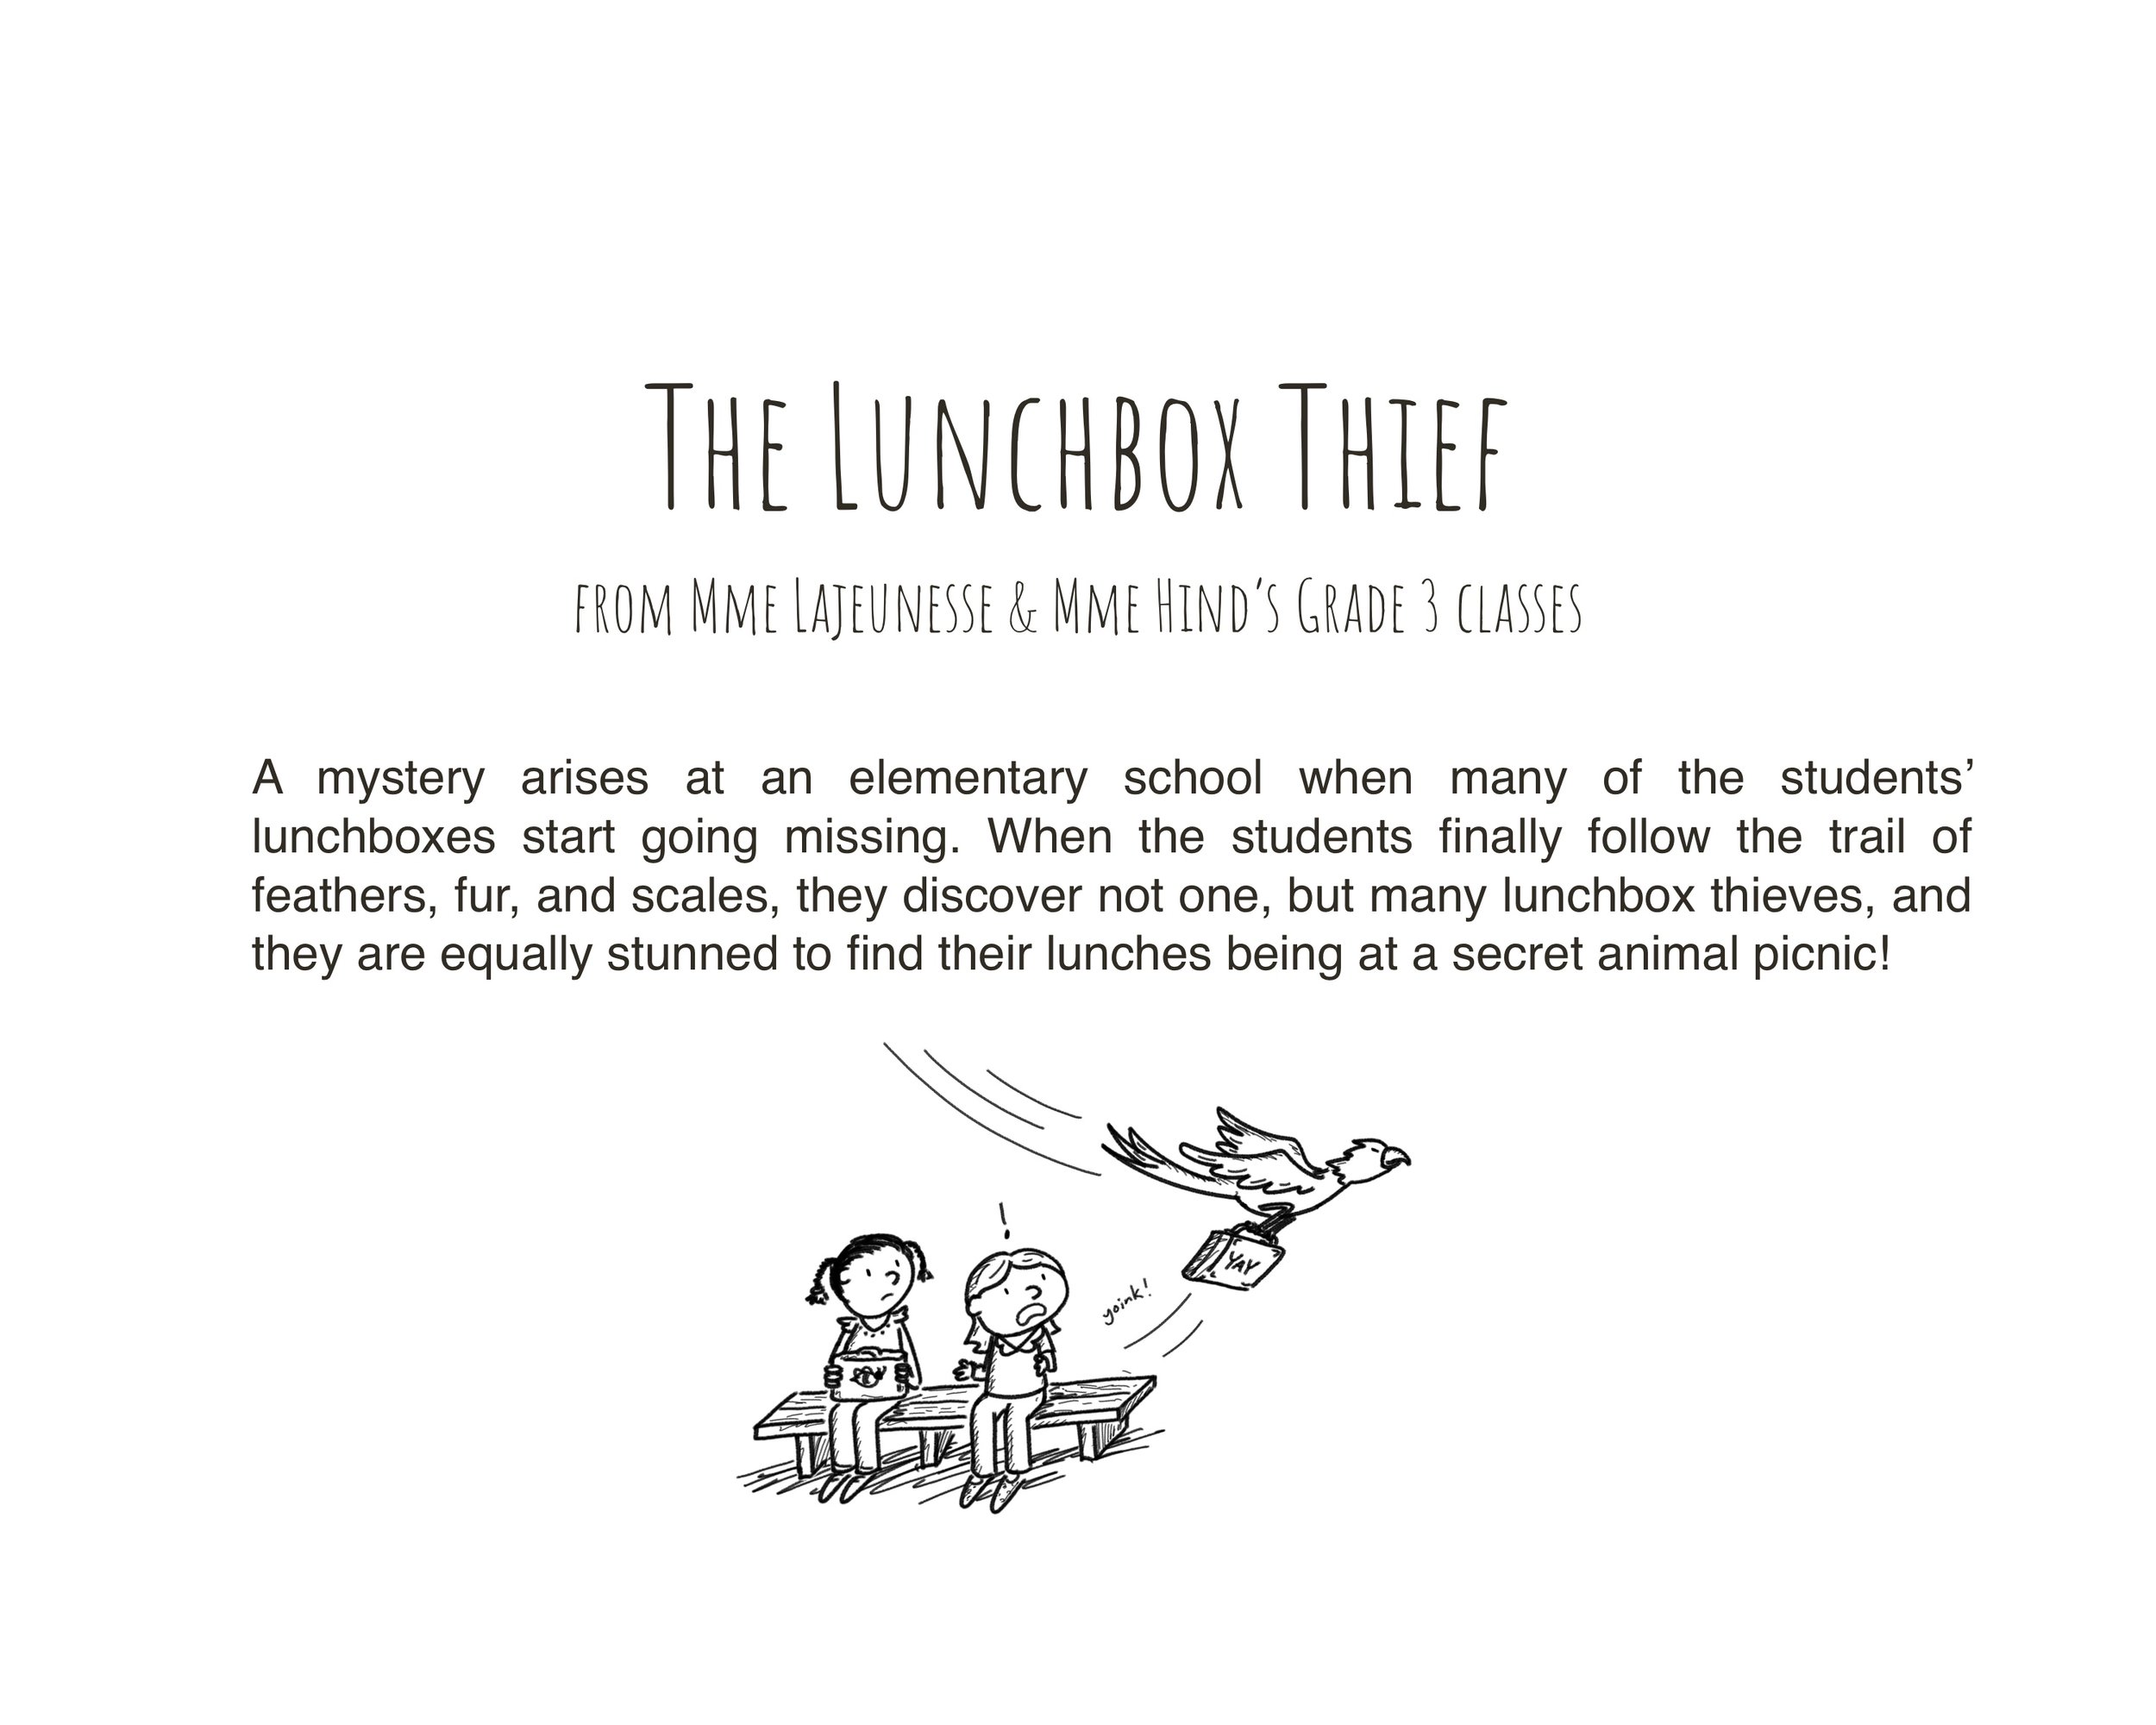  Synopsis of ‘The Lunchbox Thief’ 